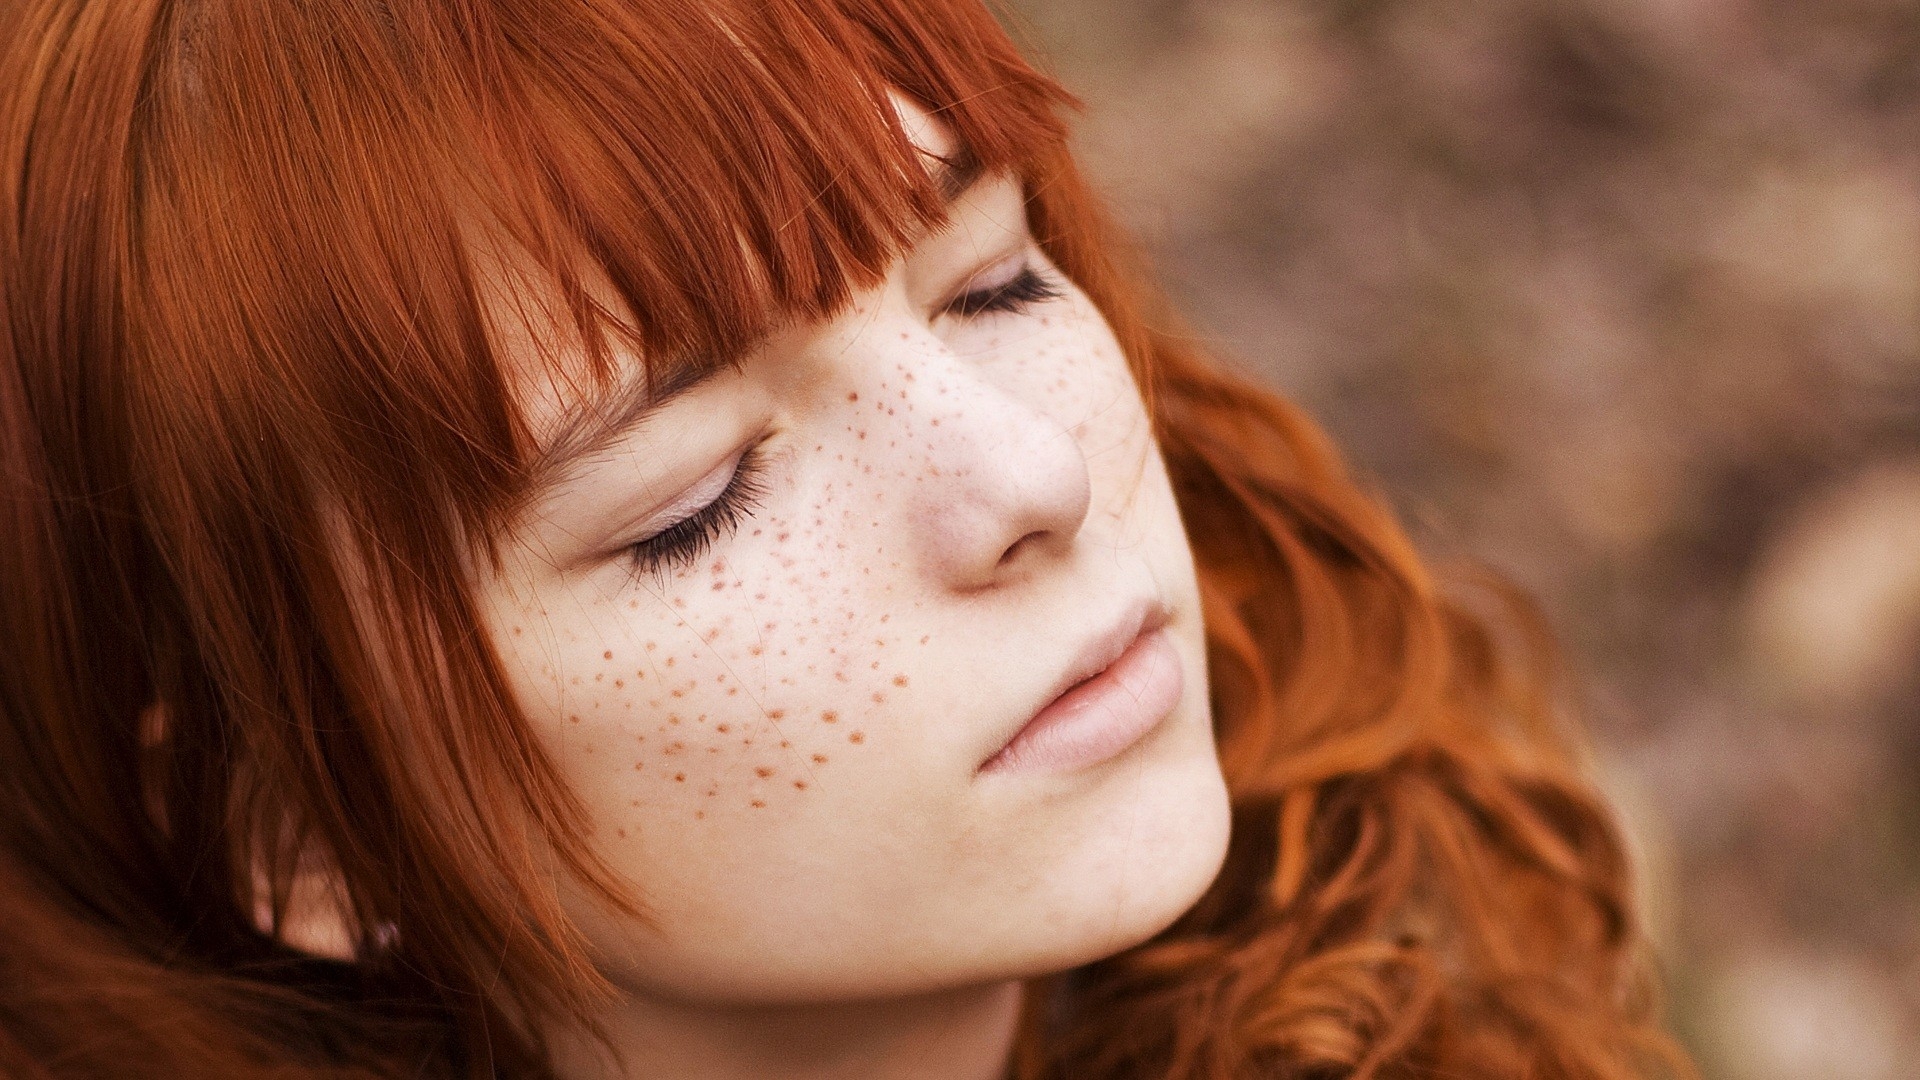 Girls With Freckles Wallpaper